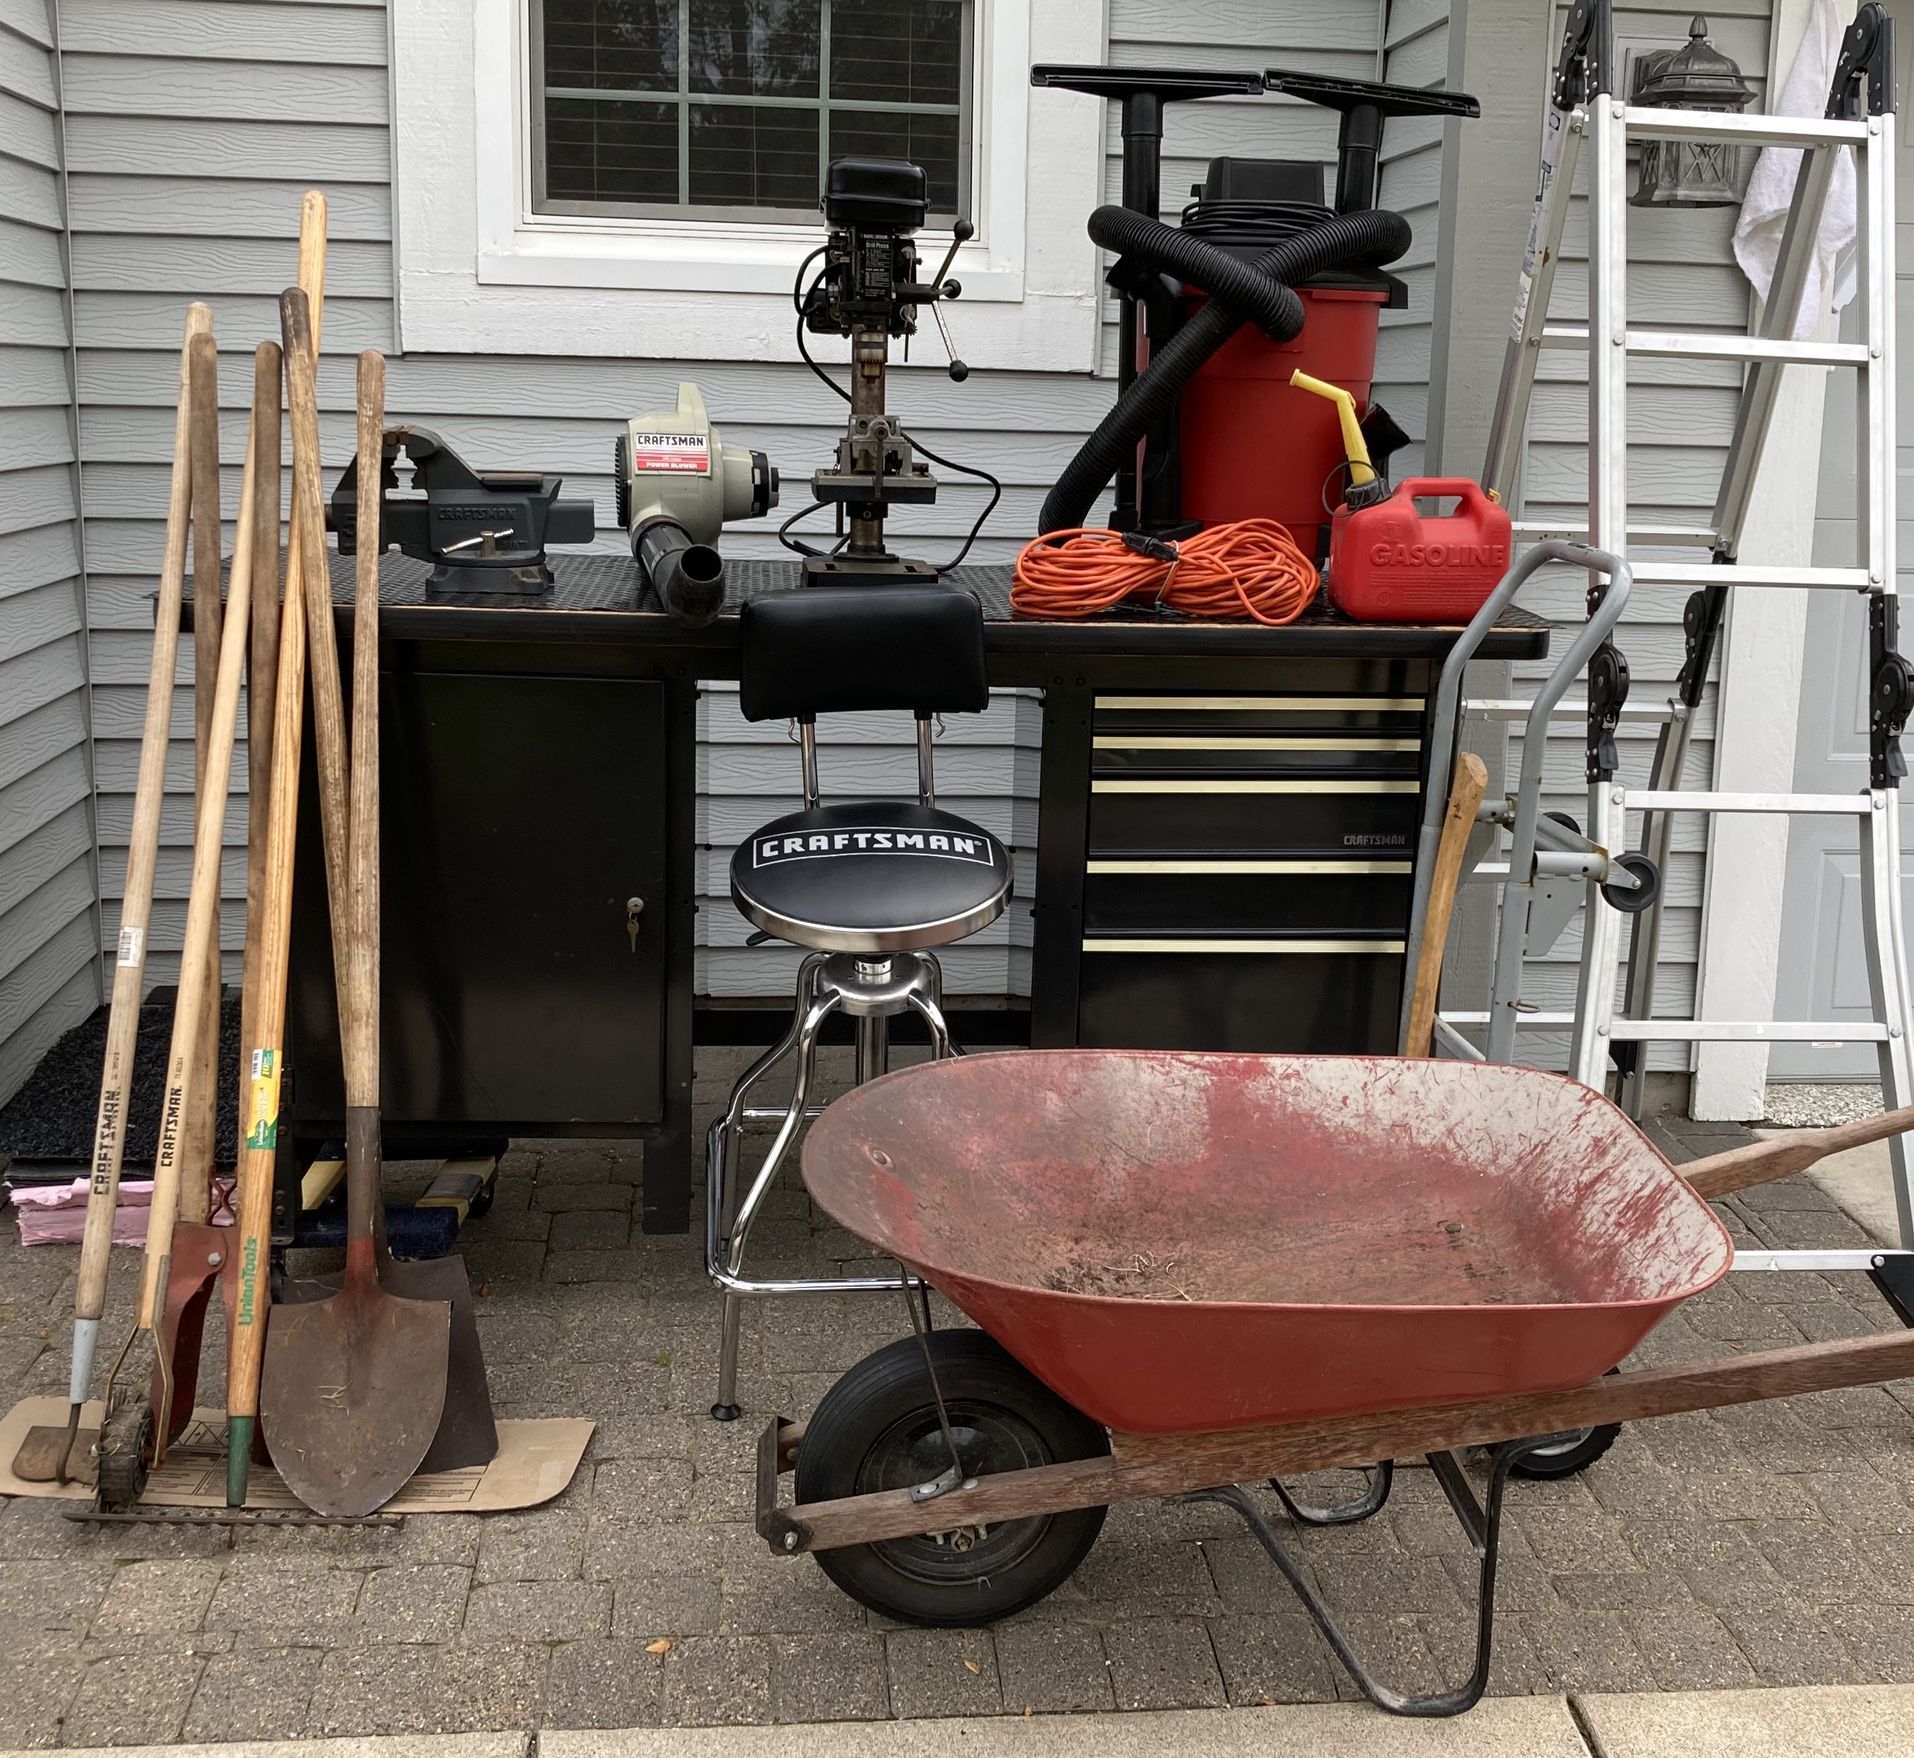 Shop and Yard Tools  ($65 for last 2 items)